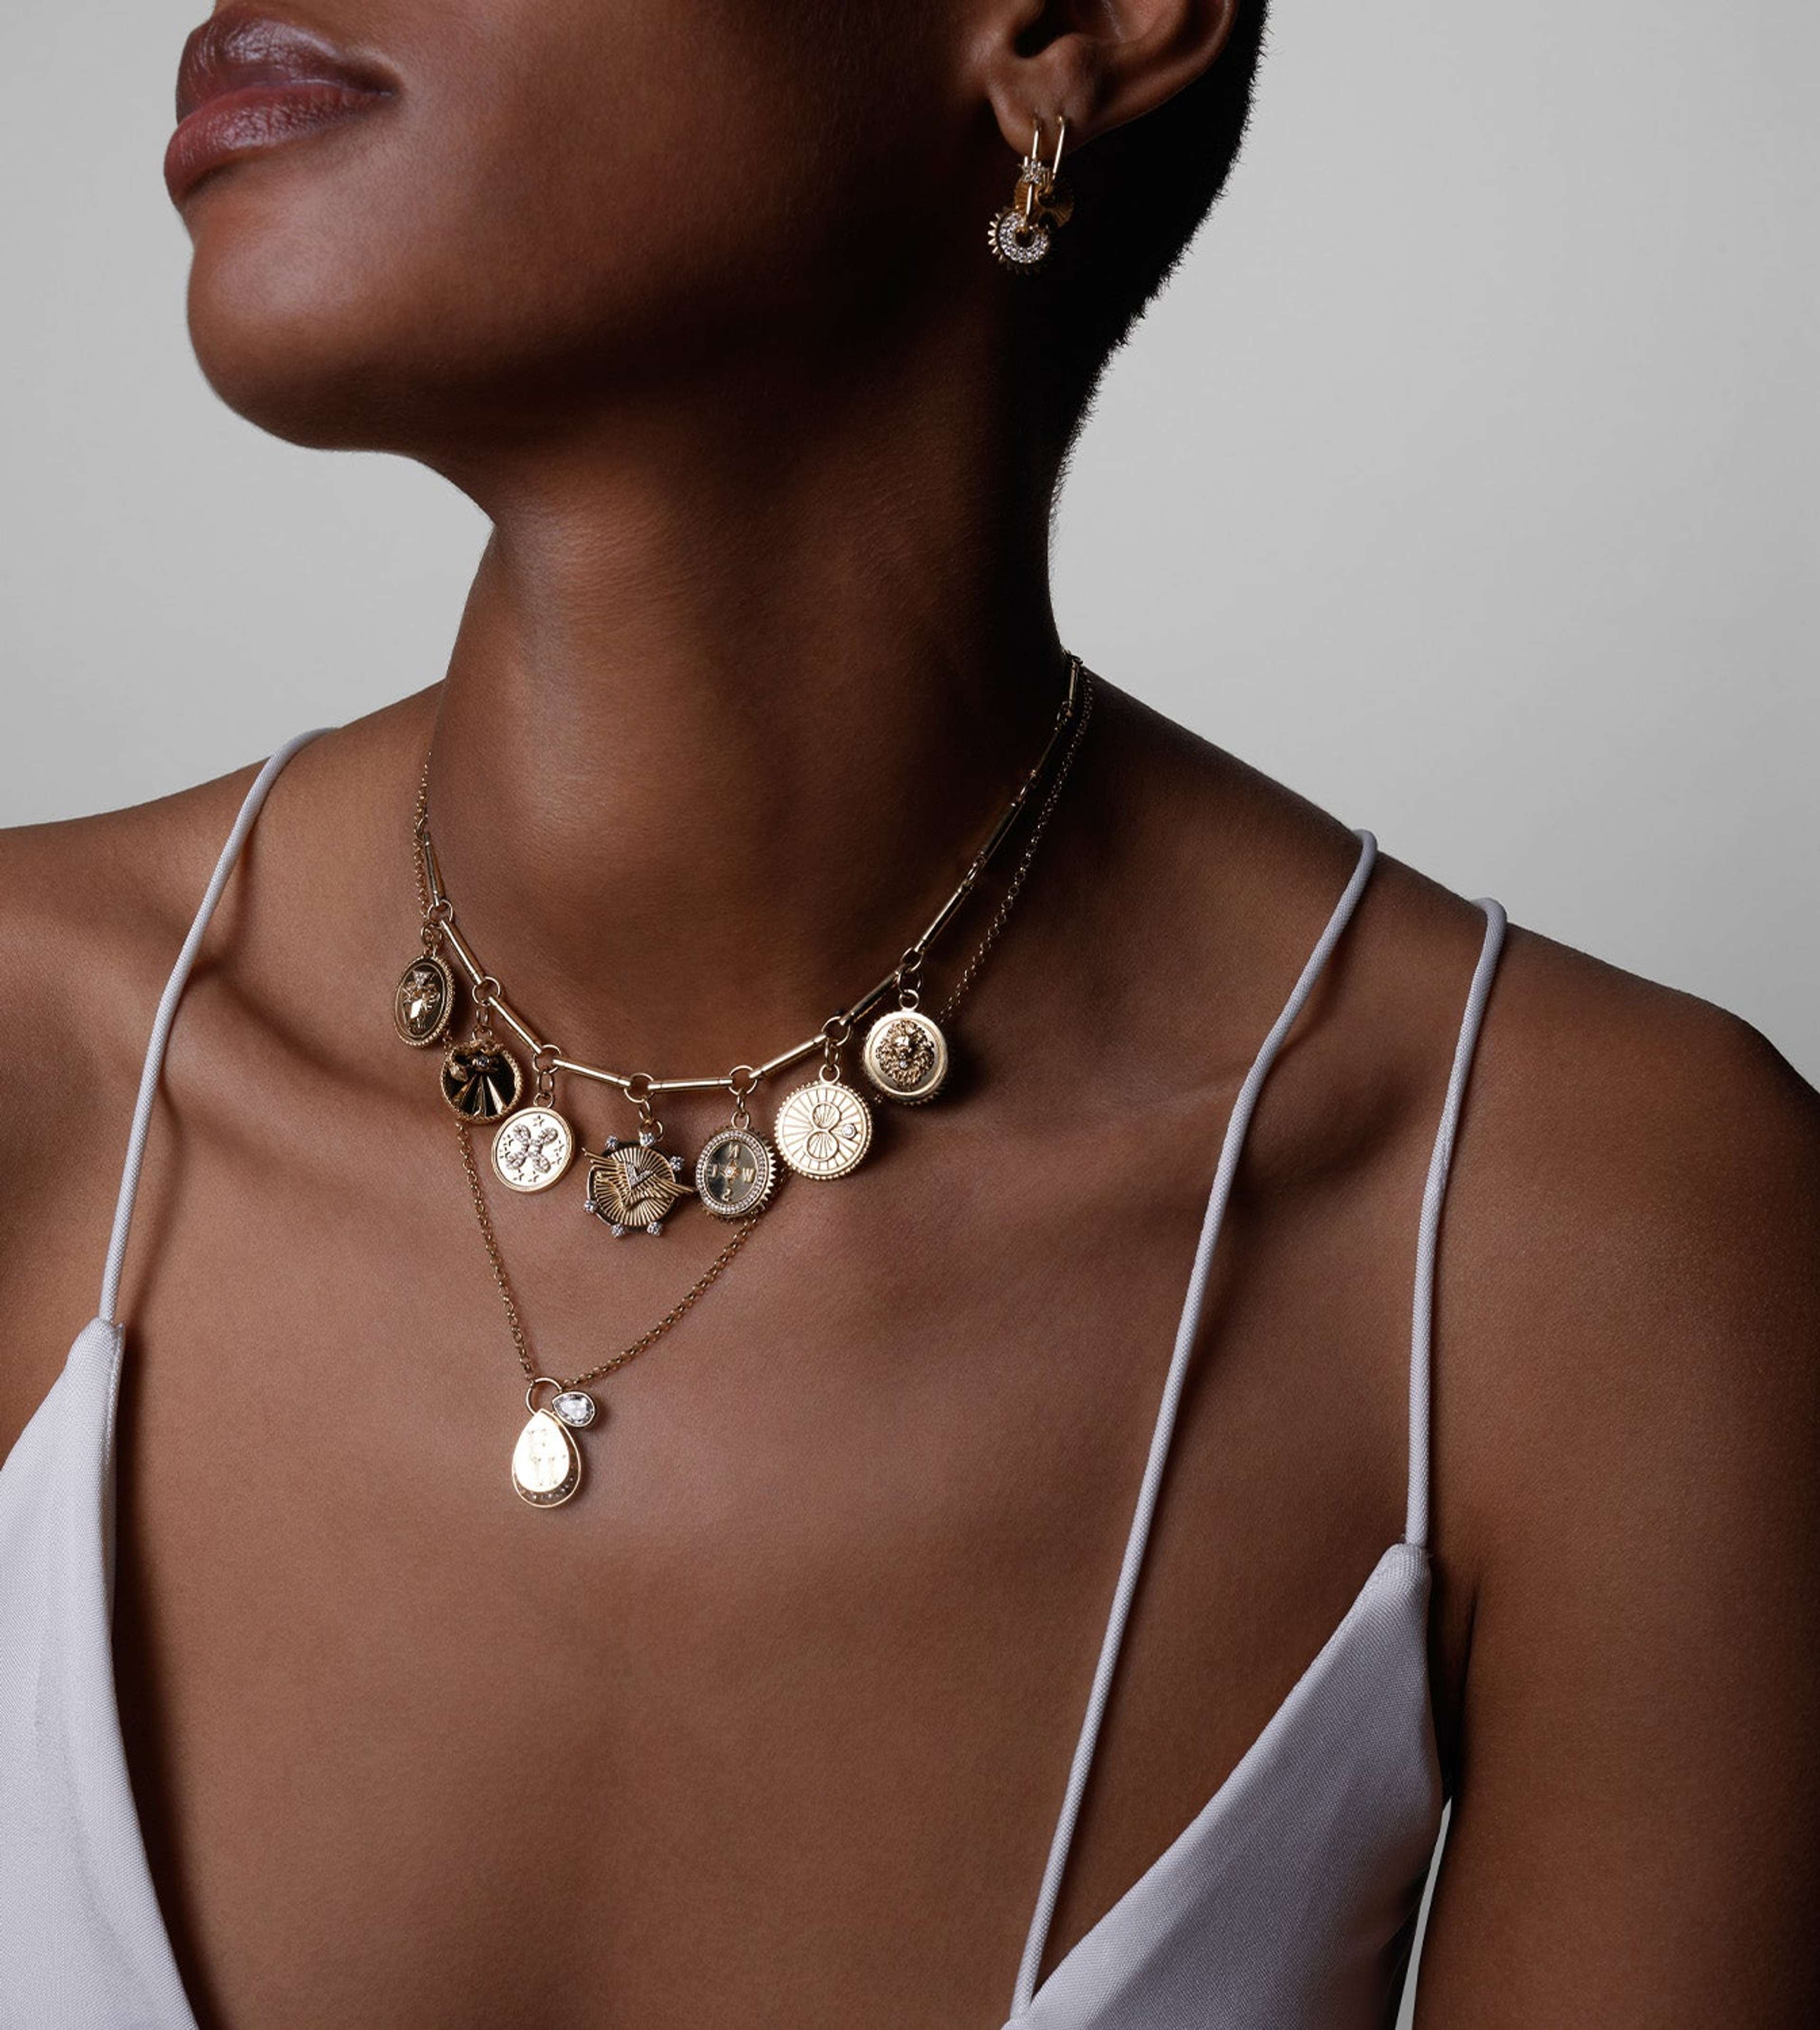 A necklace by FoundRae, featuring their signature protection motifs.